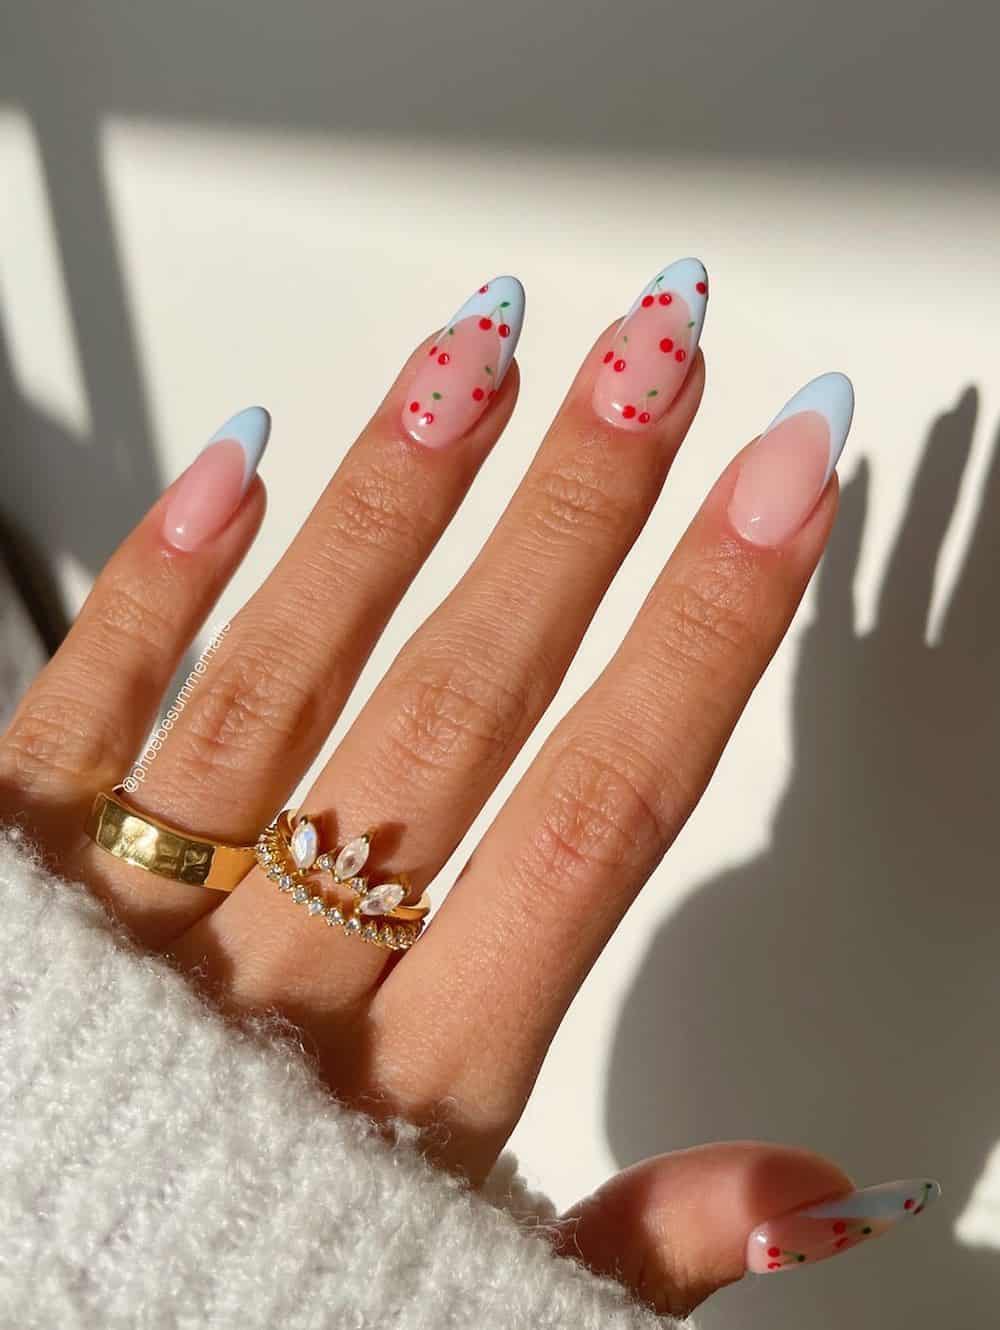 A hand with long nude almond nails with light blue French tips and cherry nail art on two nails